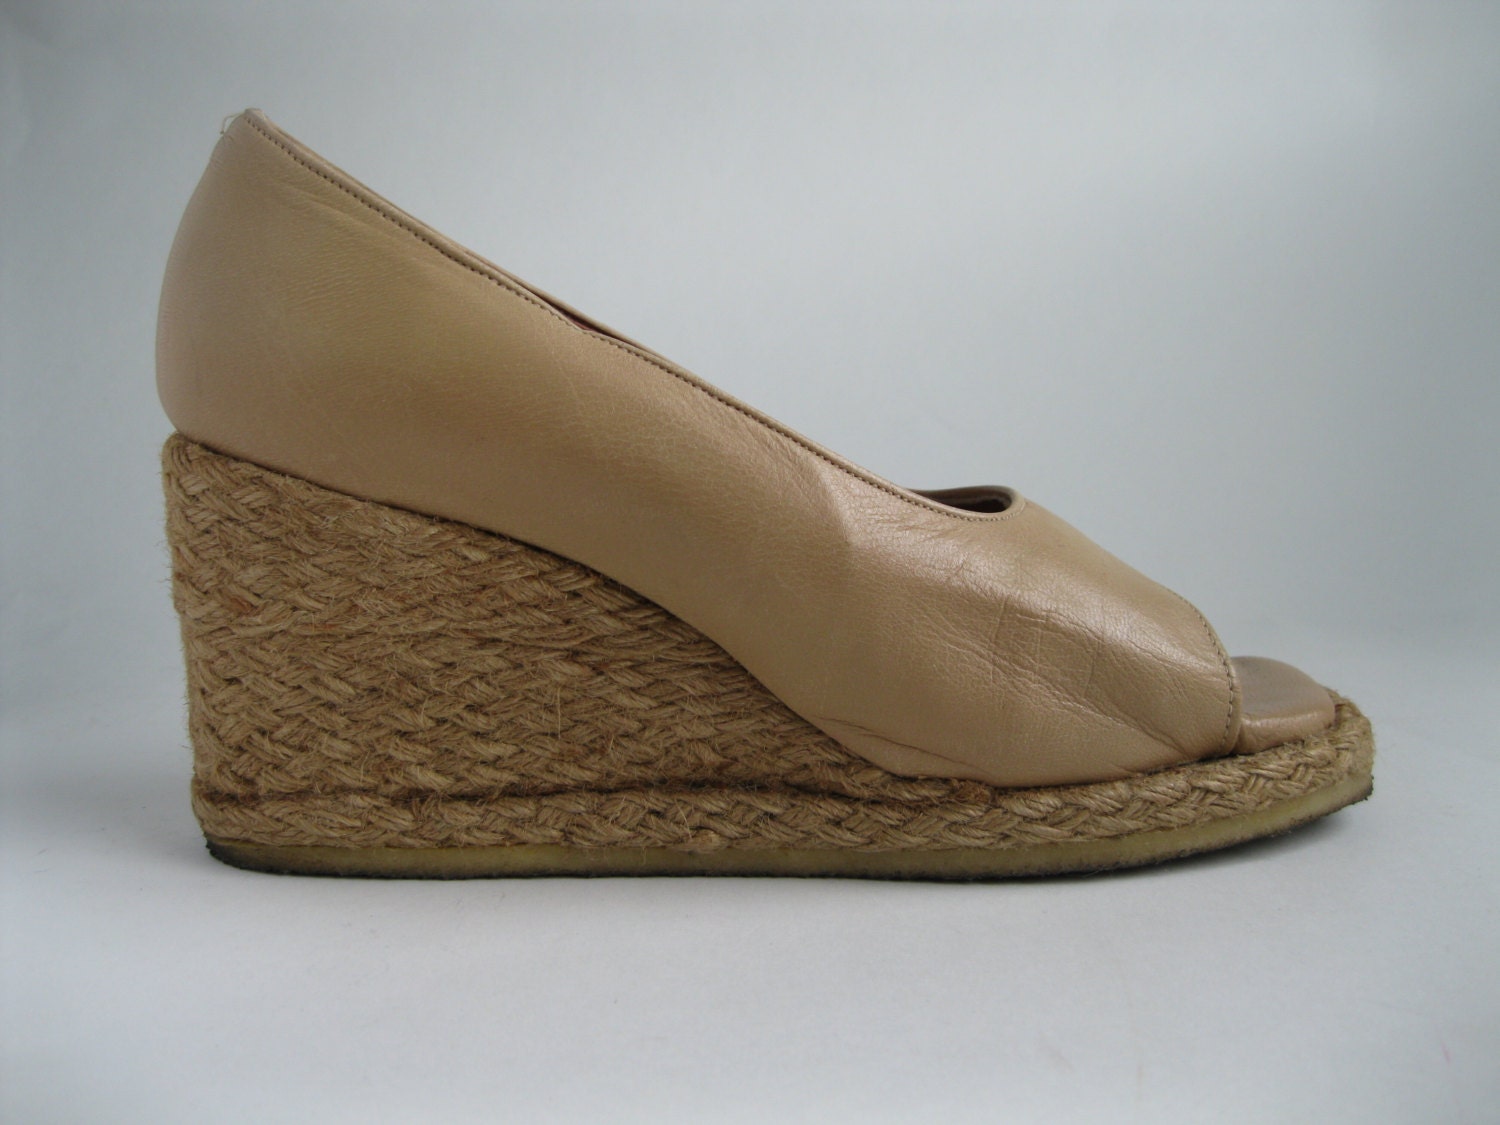 Vintage 1970s Neutral Wedge Shoes Leather Nautical Summer